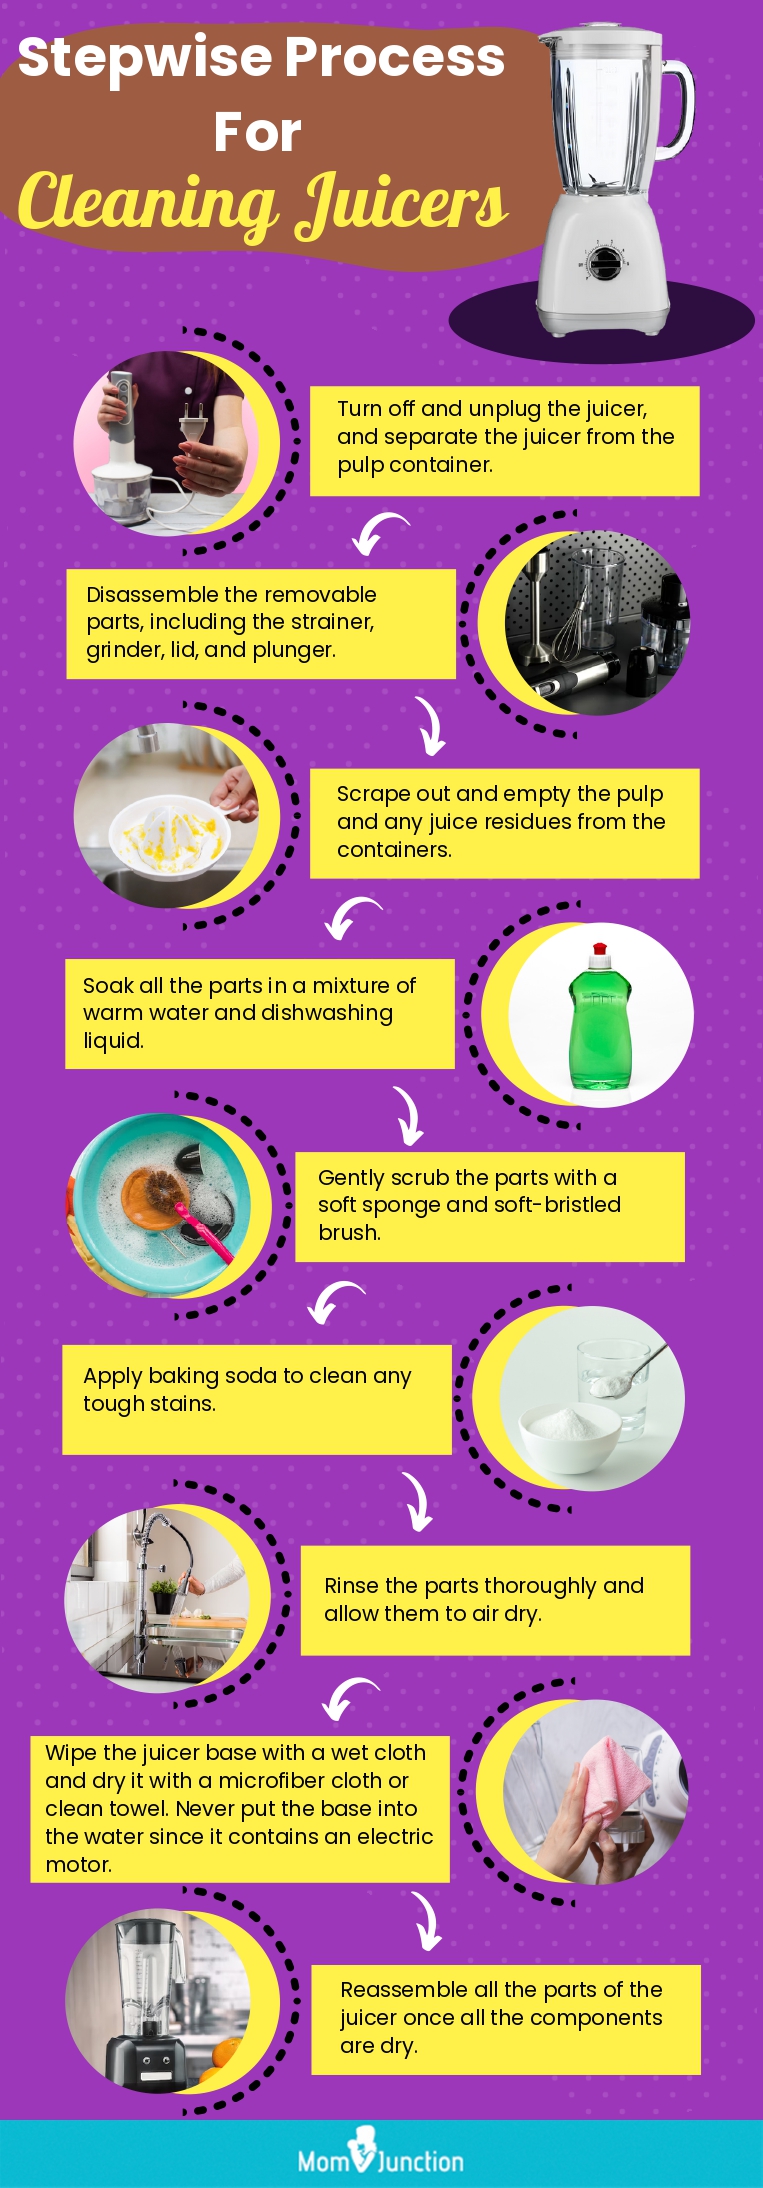 Stepwise Process For Cleaning Juicers(infographic)